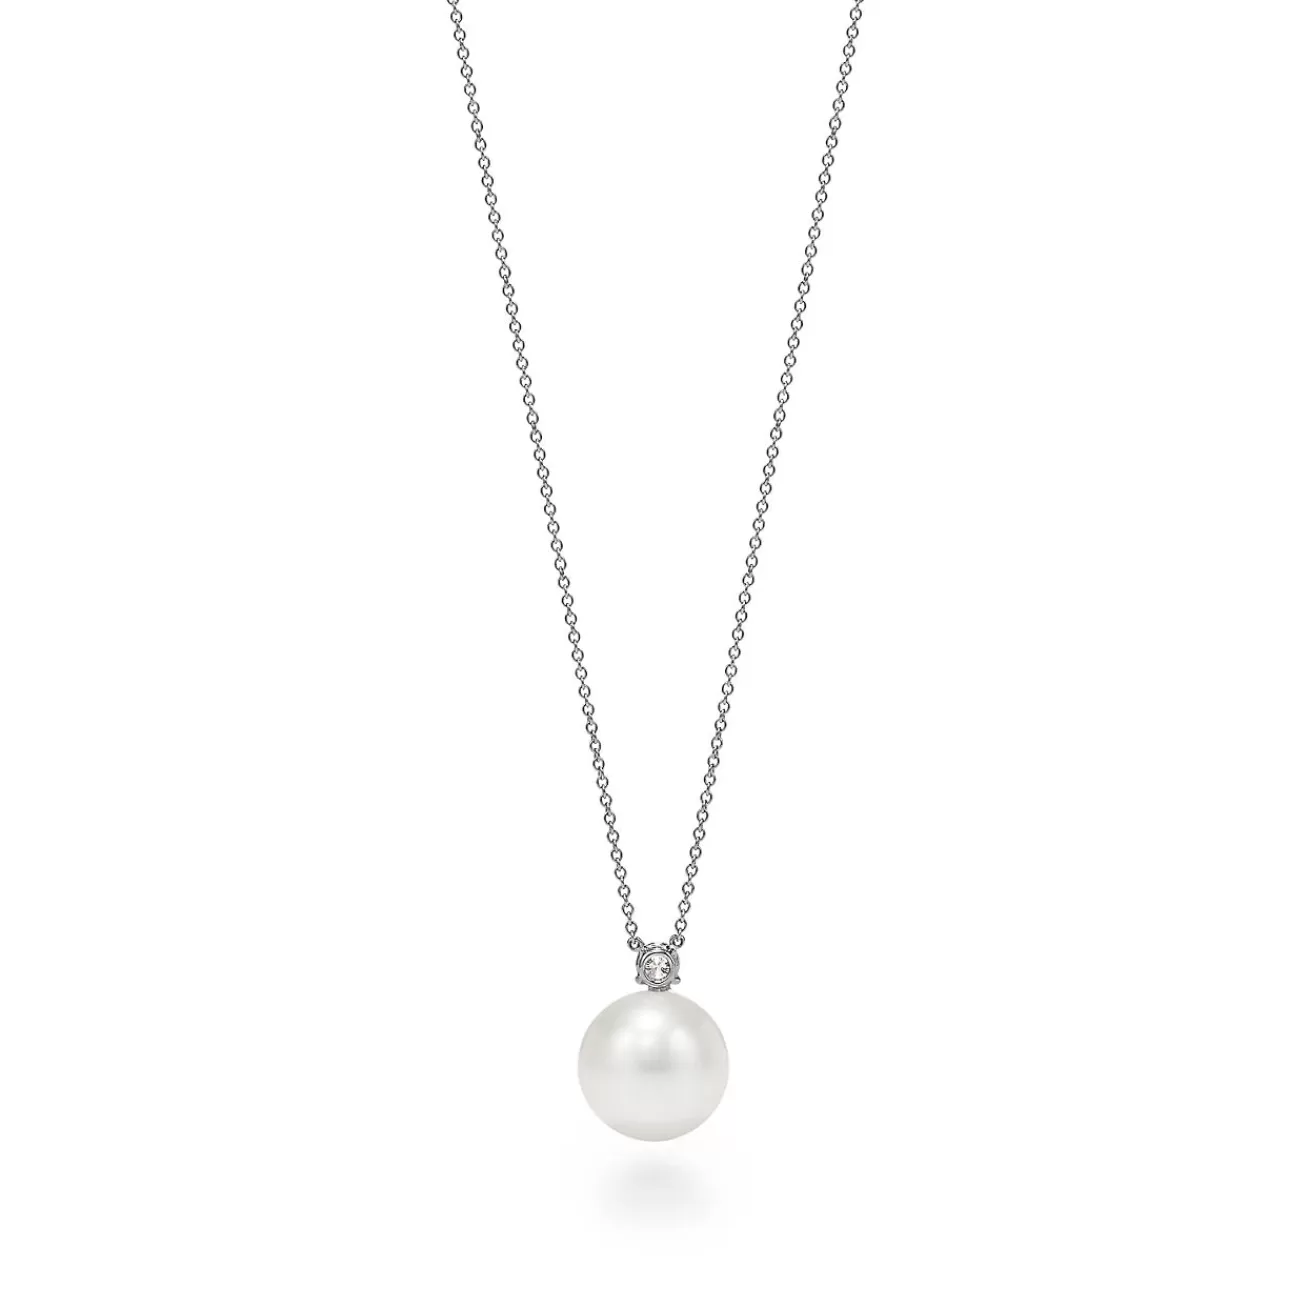 Tiffany & Co. Tiffany South Sea Noble pendant in platinum with a cultured pearl and a diamond. | ^ Necklaces & Pendants | Platinum Jewelry